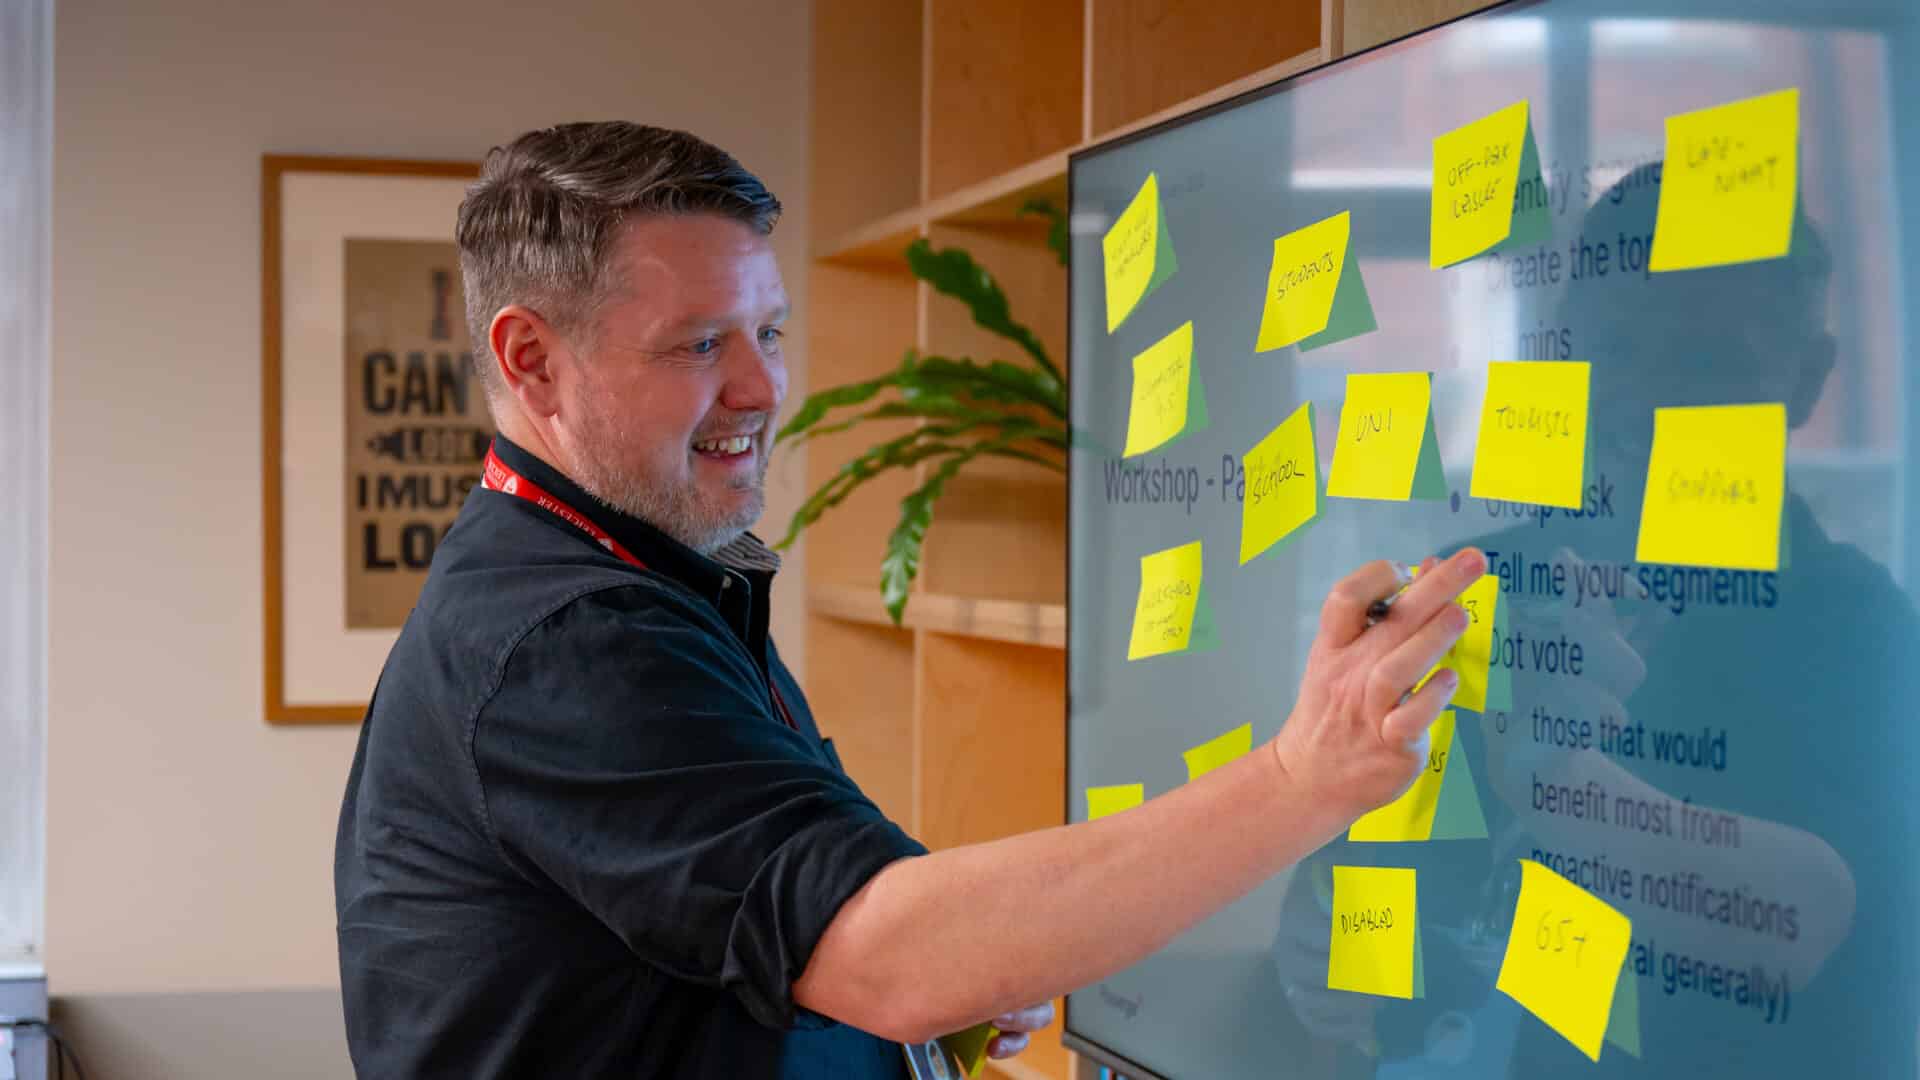 A man in front of a screen sticking on yellow post it notes